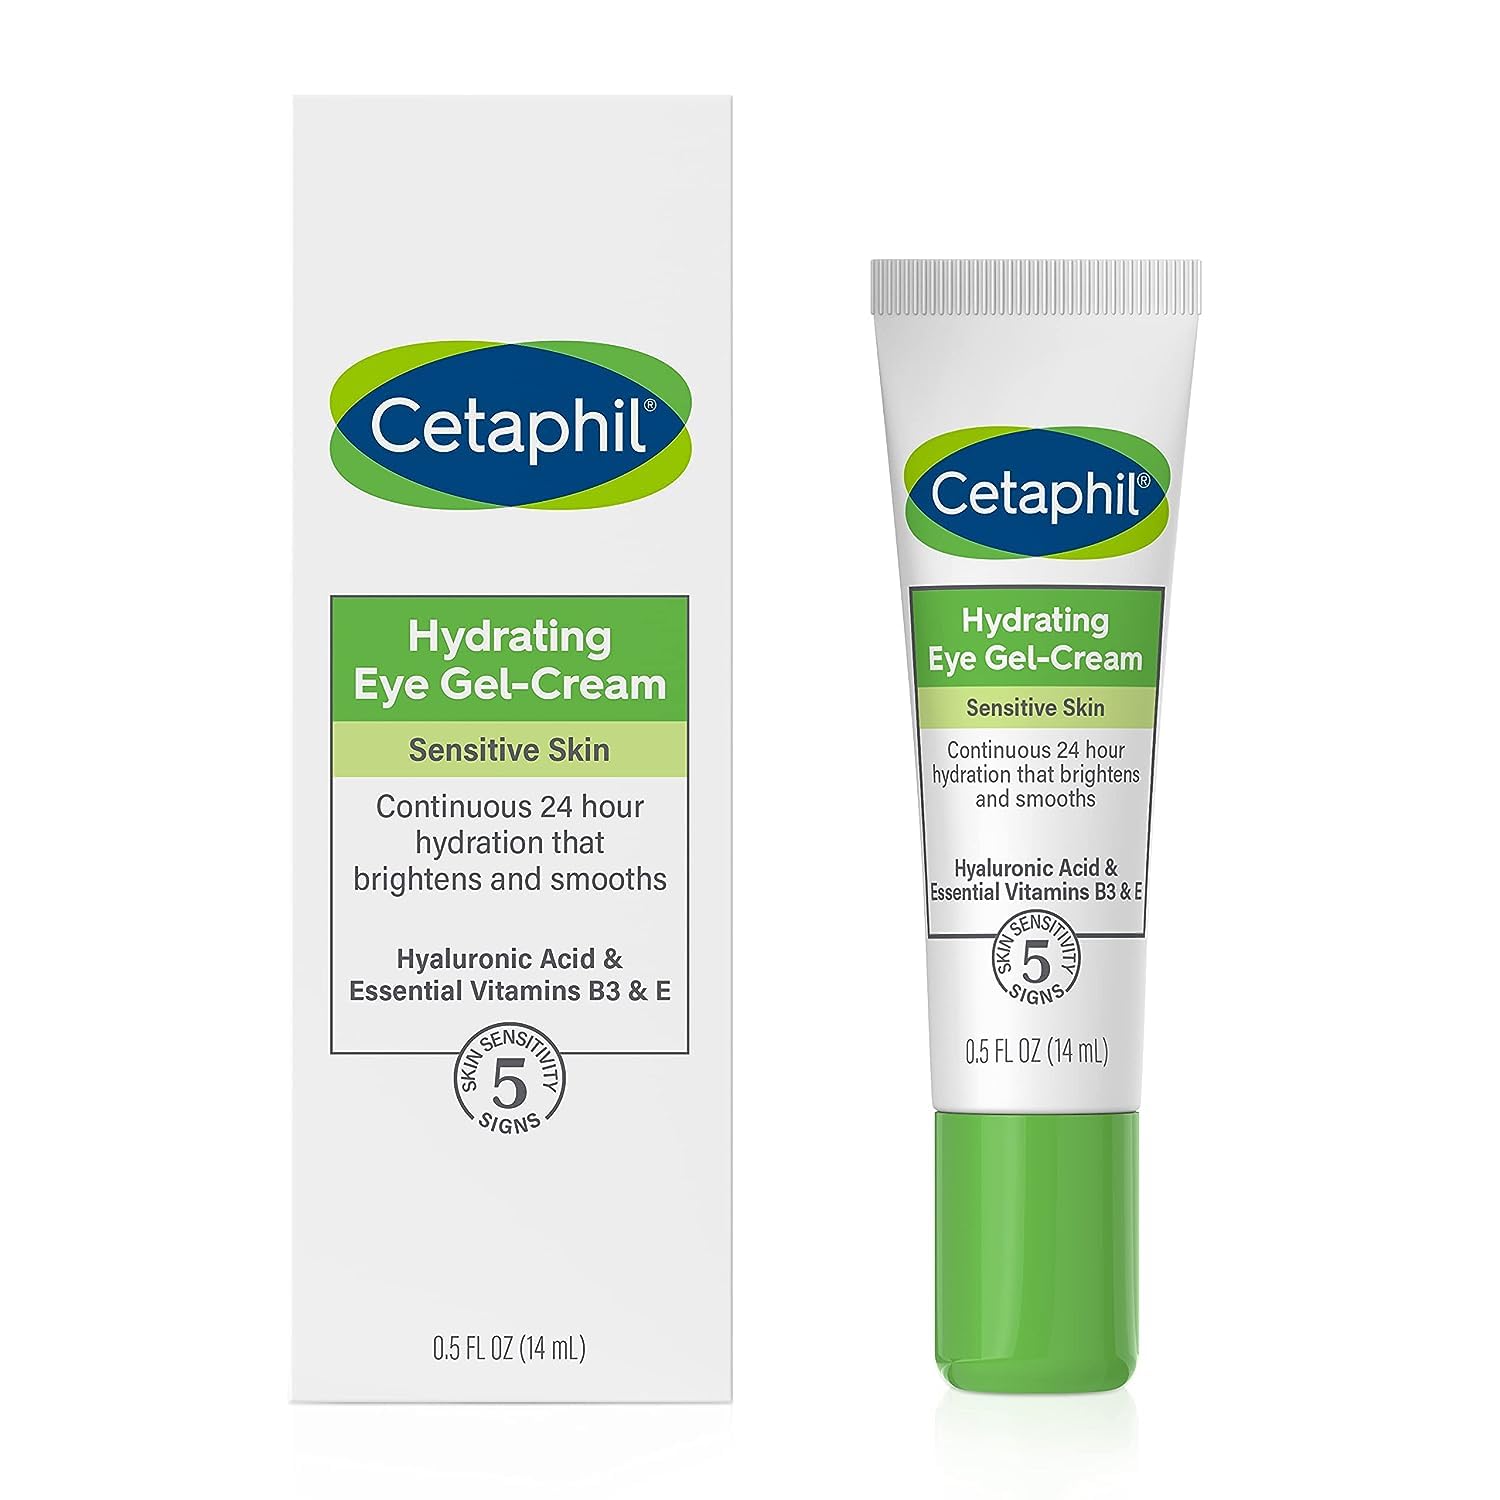 Cetaphil Hydrating Eye Gel-Cream, With Hyaluronic Acid, 0.5 fl oz, Brightens and Smooths Under Eyes, 24 Hour Hydration for All Skin Types, (Packaging May Vary)